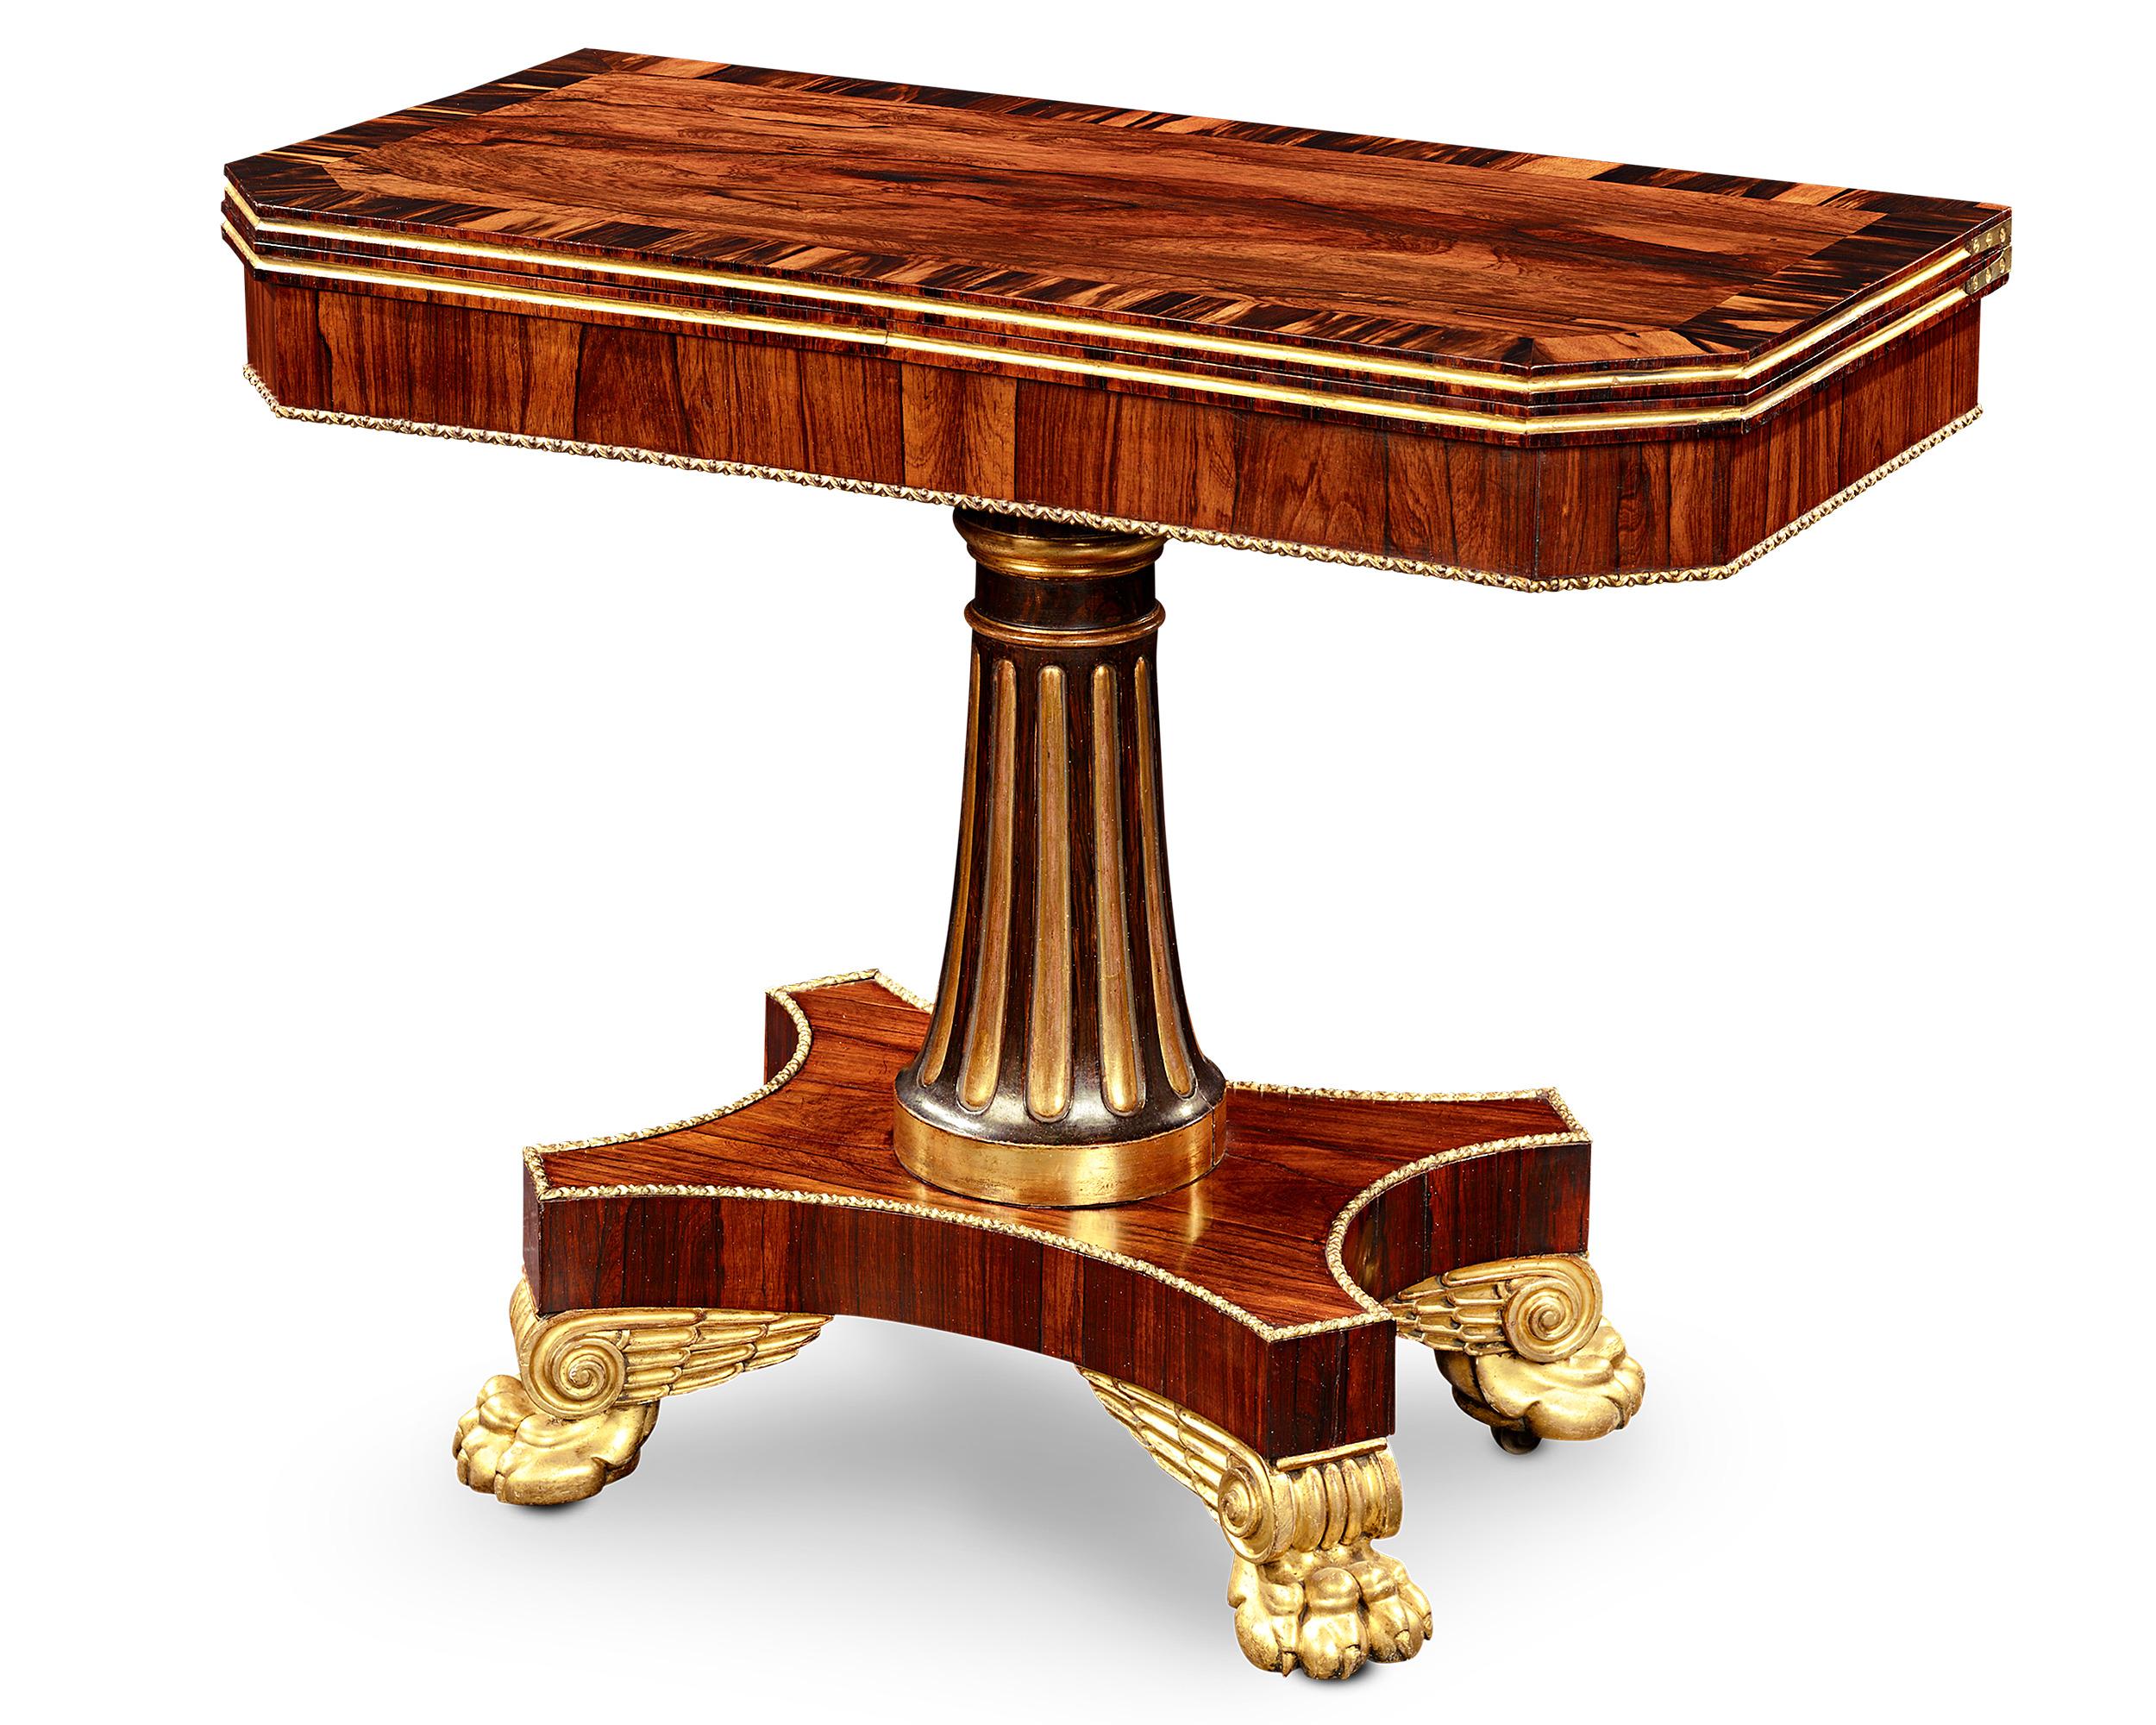 These exceptional late Regency card tables were designed with both elegance and functionality in mind. Crafted of rosewood after a model by Henry Holland, the calamander-banded and gilt tables serve as a well-appointed side table with a 